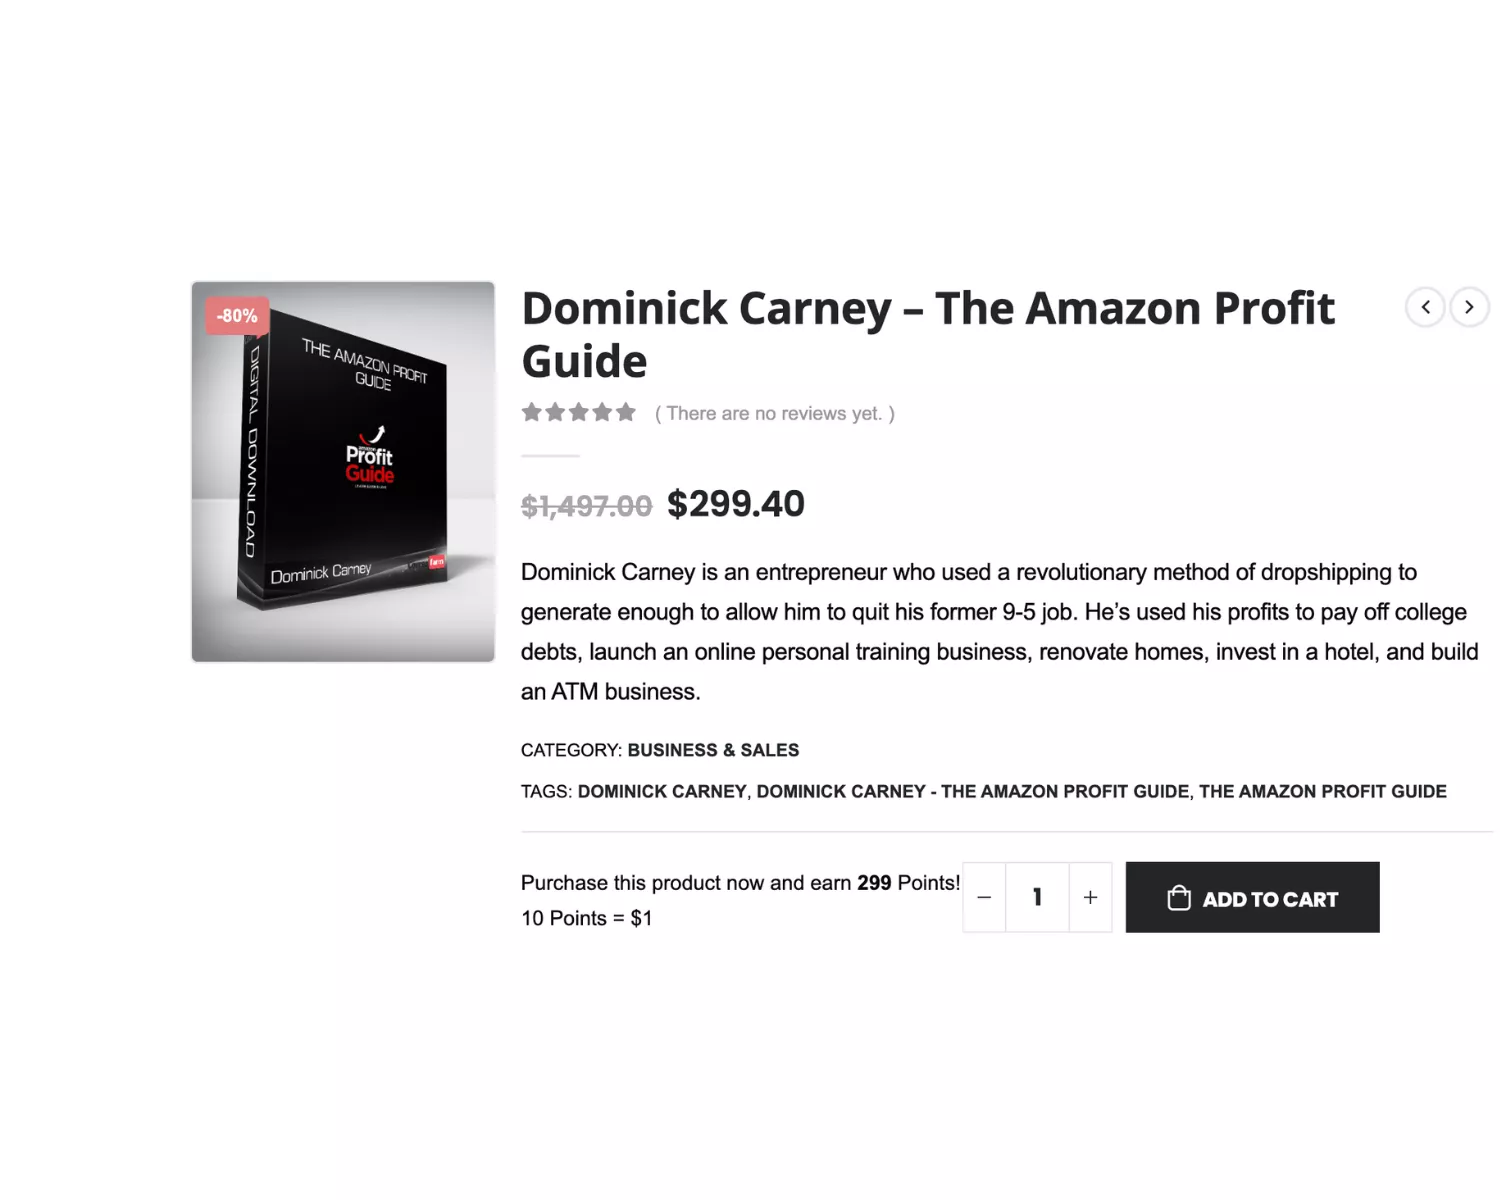 A discounted rate for Amazon Profit Guide